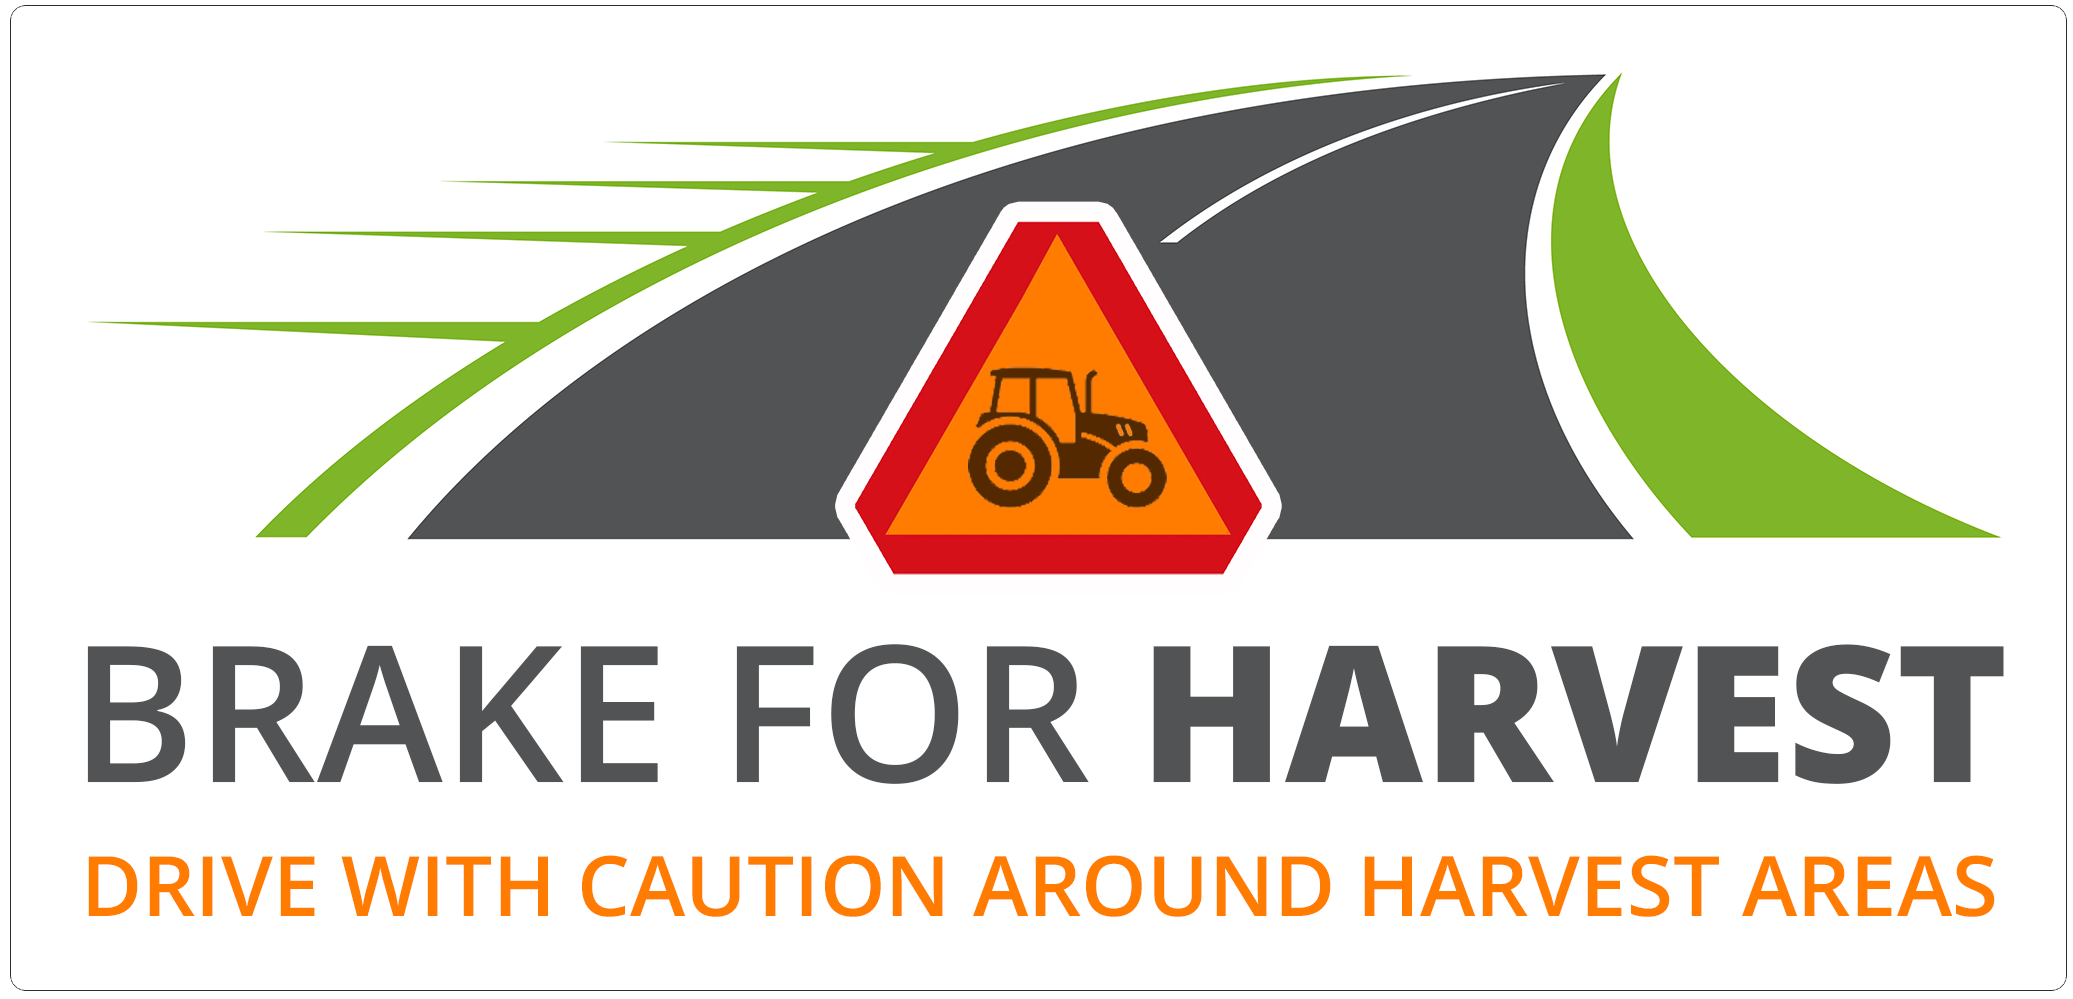 Brake for Harvest Campaign Logo by Holloway Agriculture